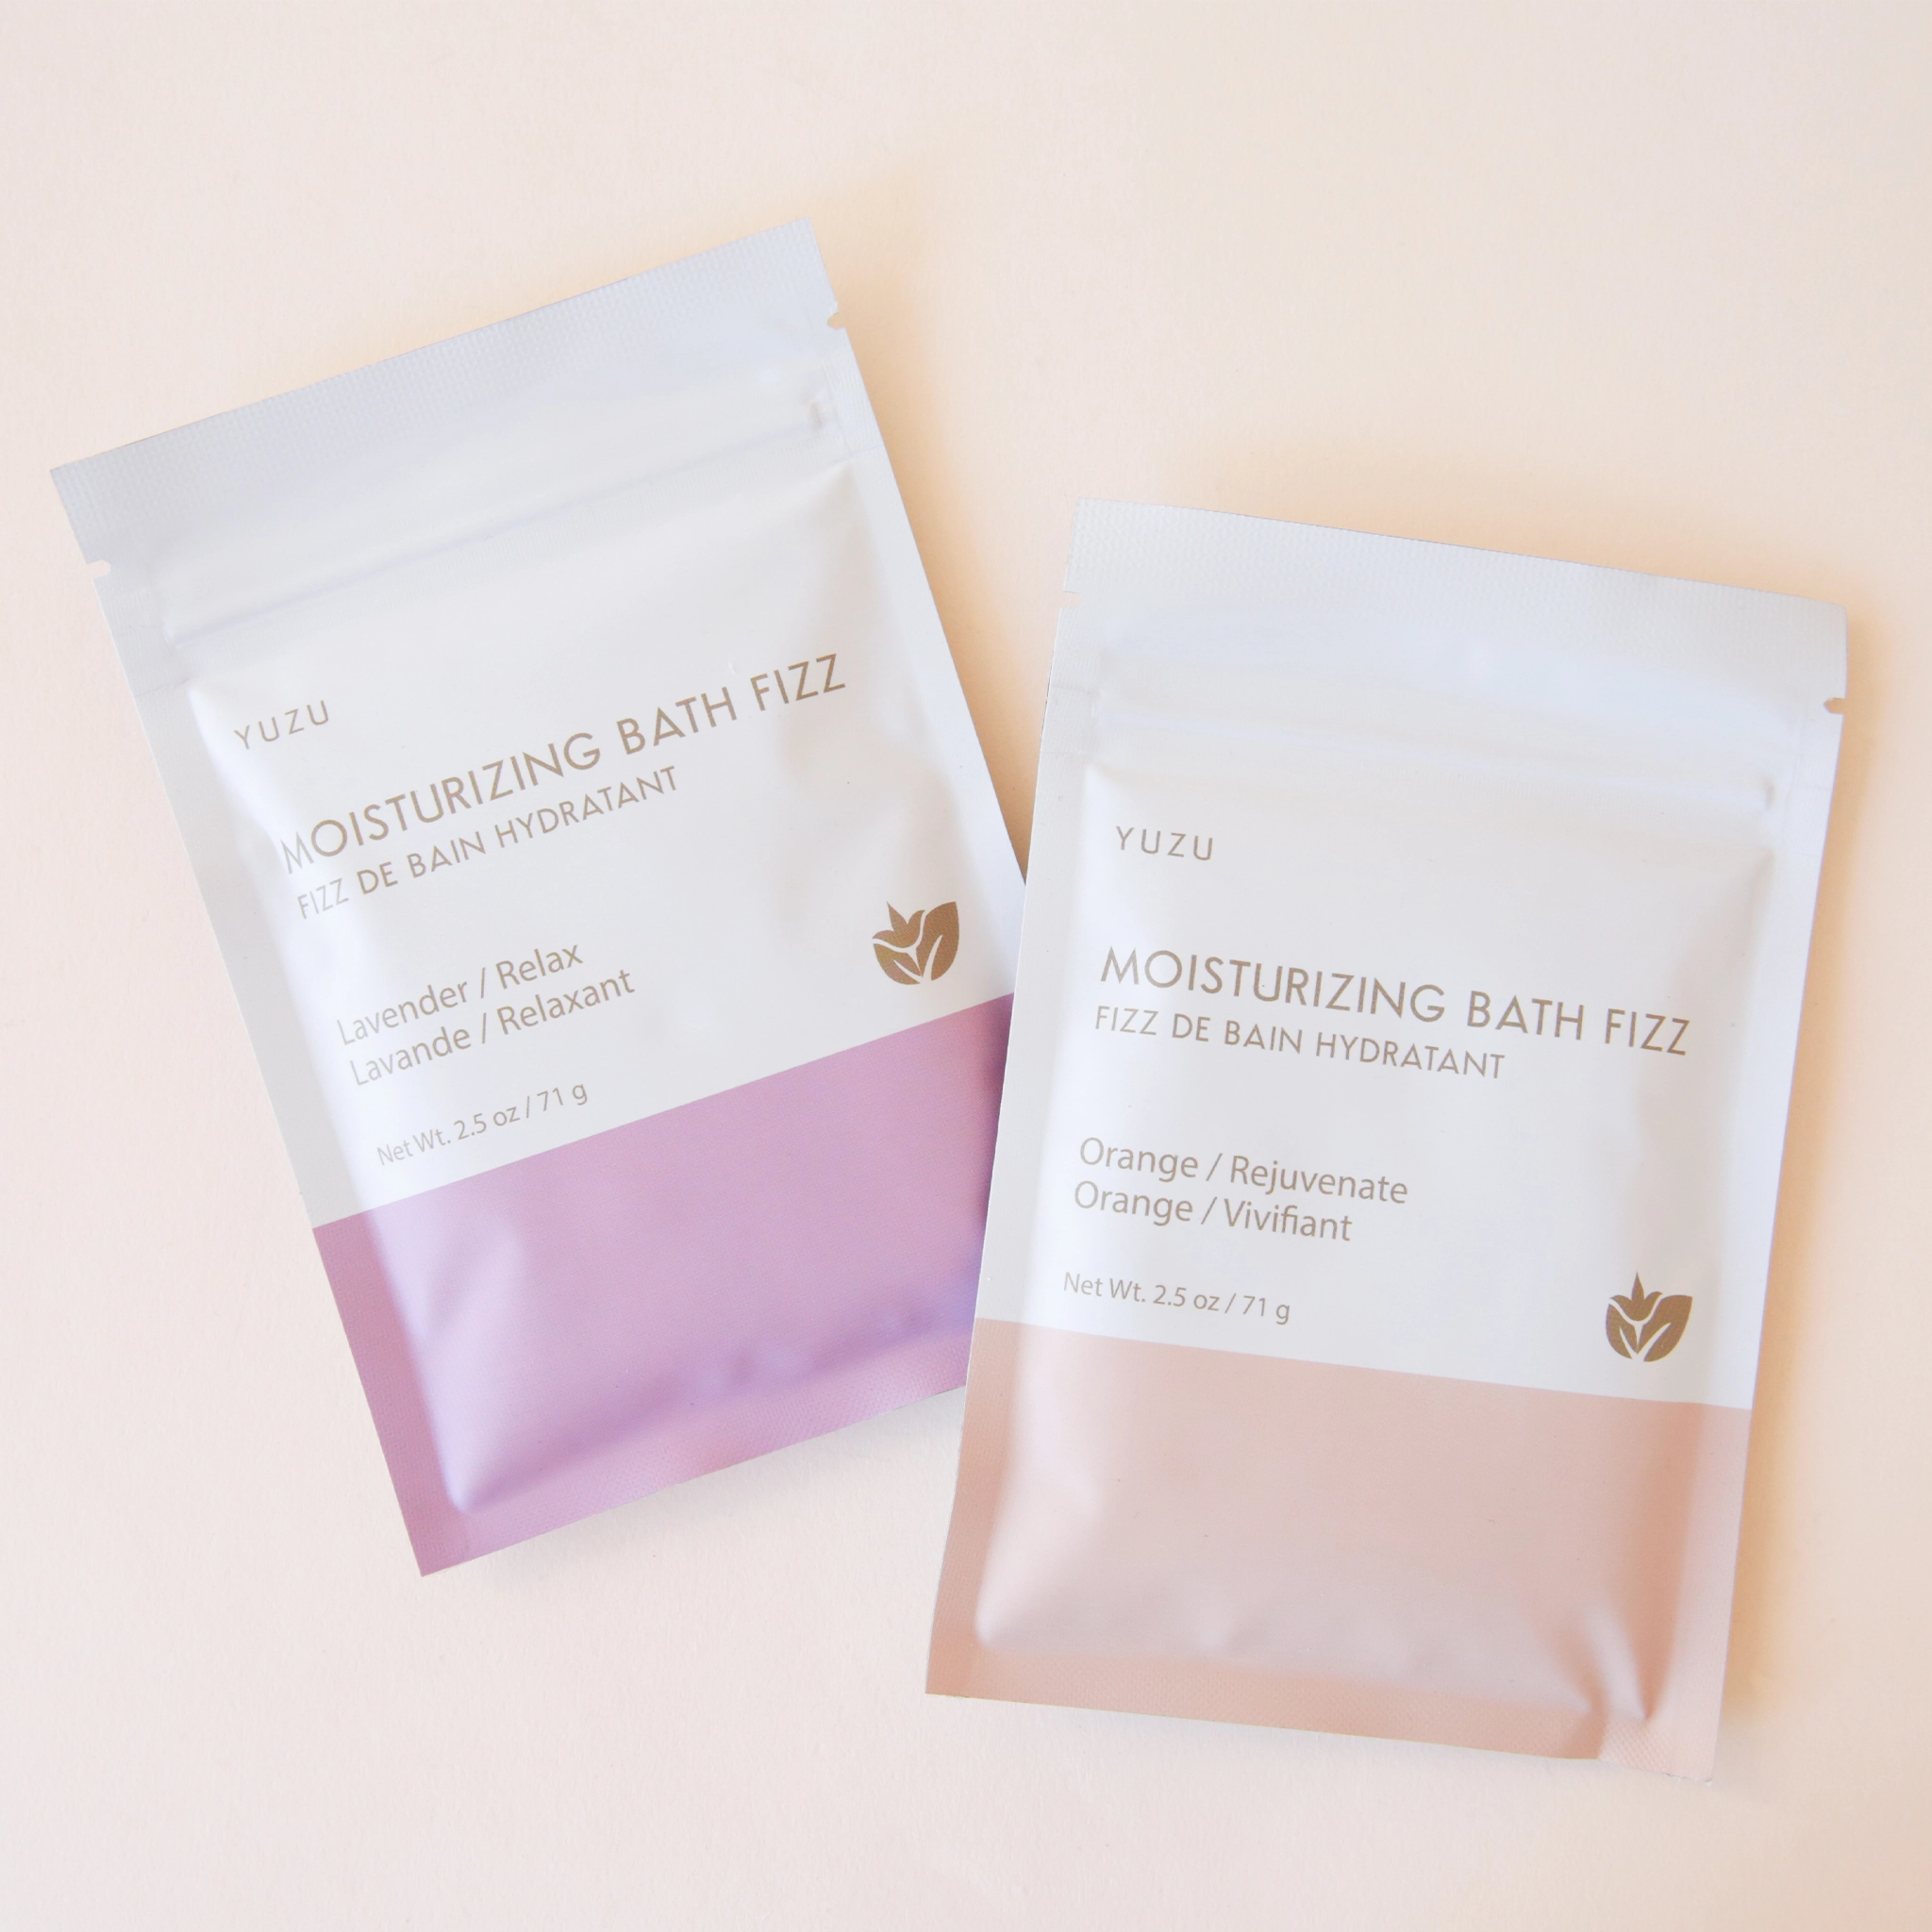 A packet of bath salts with the bottom half a light pink color and the top half white along with text on the front that reads, &quot;Moisturizing Bath Fizz, Orange / Rejuvenate&quot; photographed with the Lavender scent that&#39;s also available on our website.